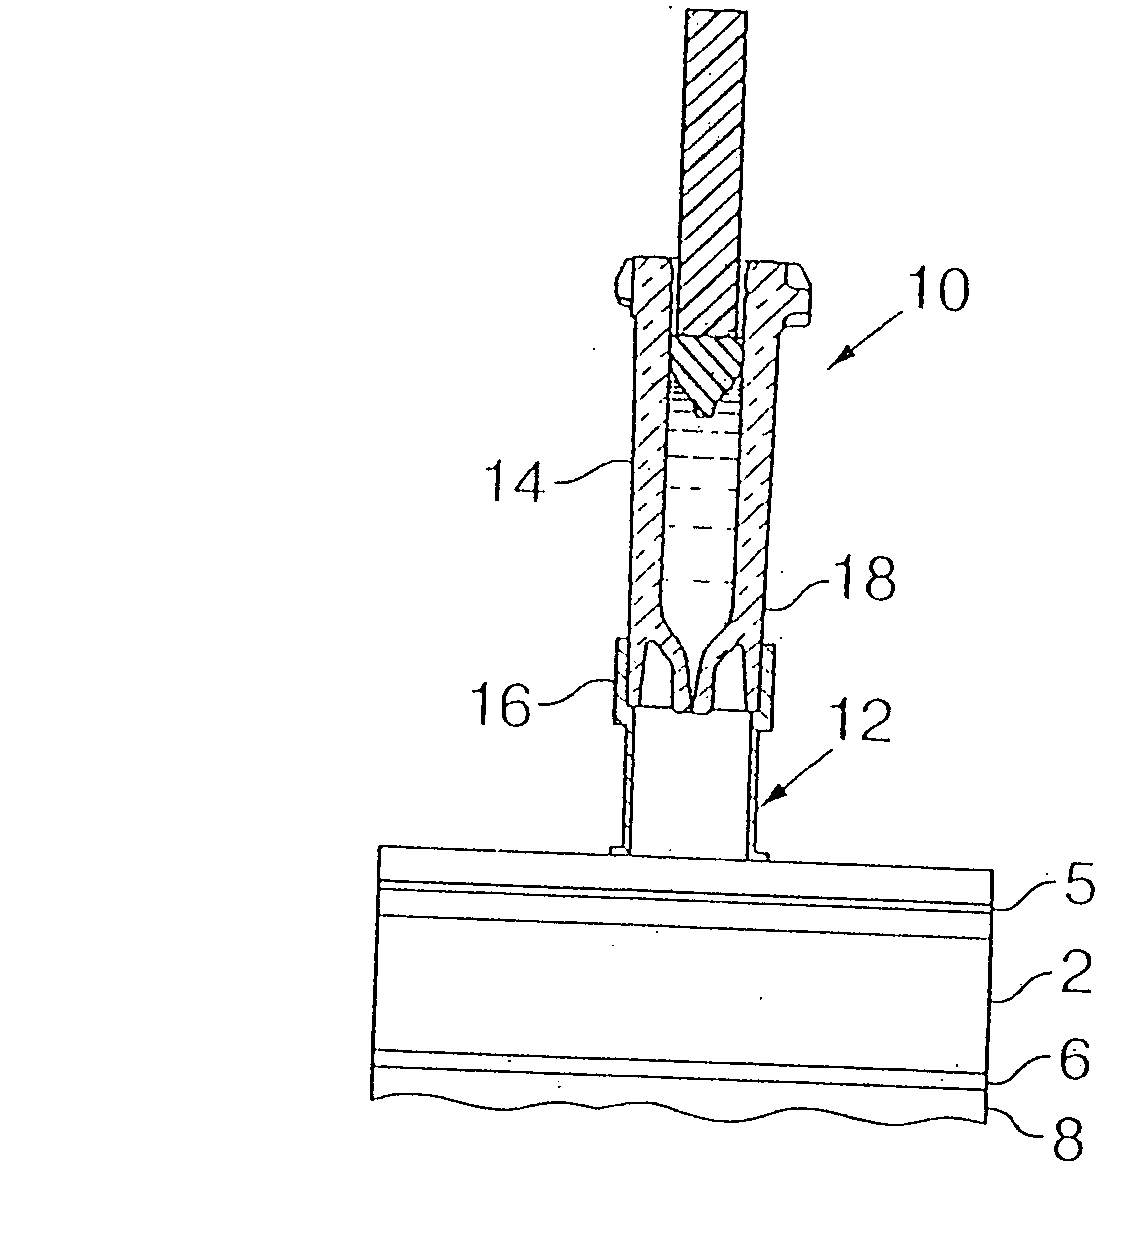 Intradermal injection system for injecting DNA-based injectables into humans